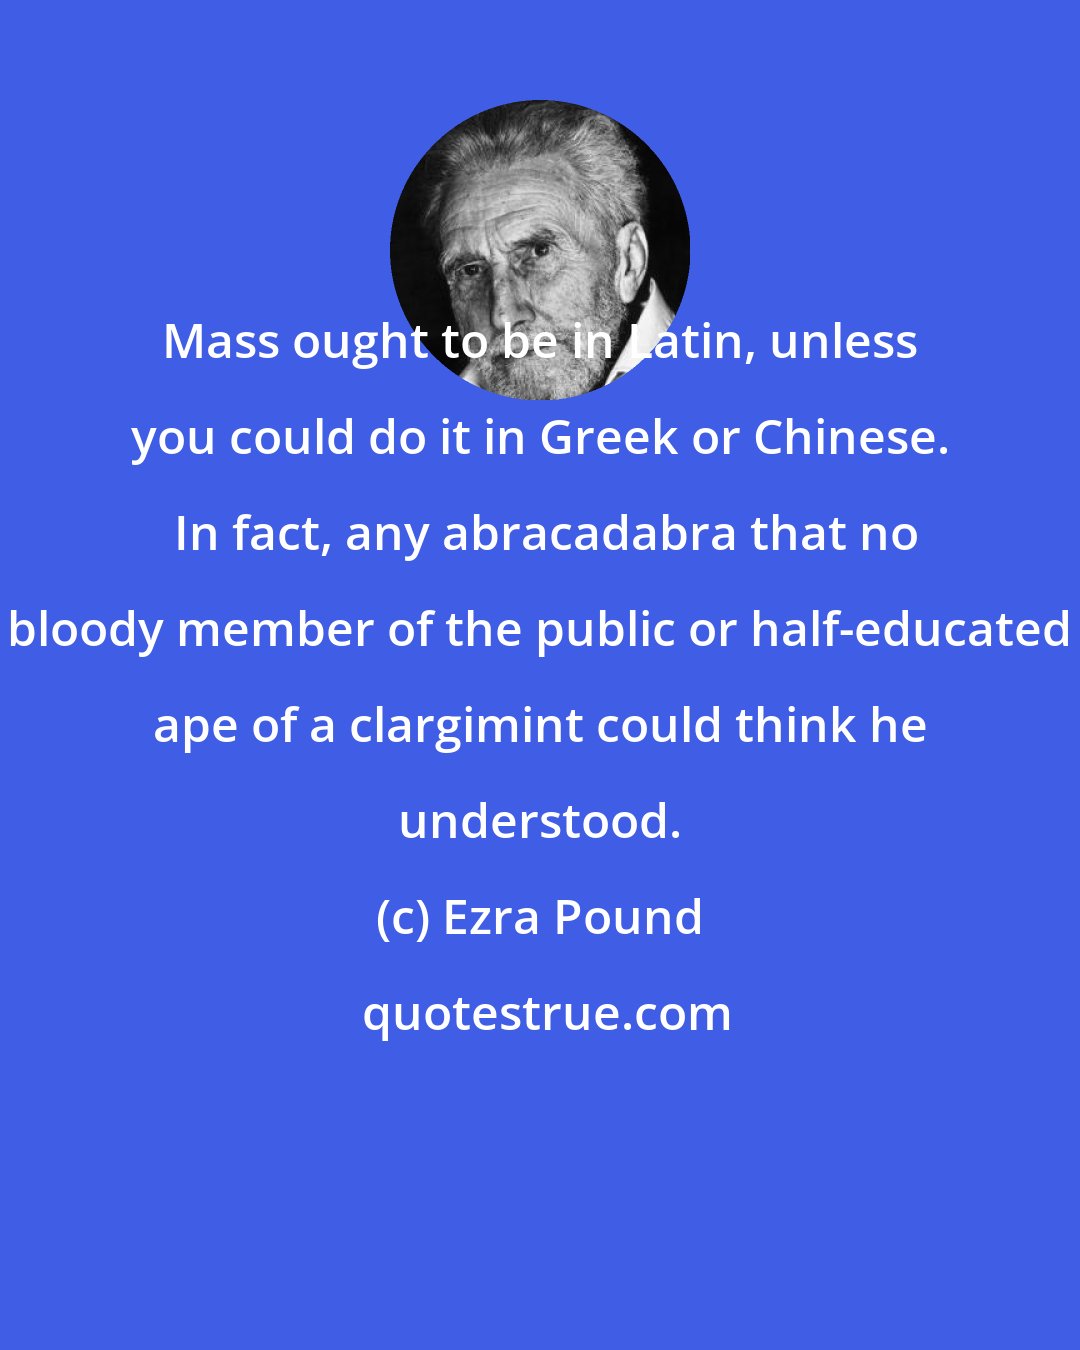 Ezra Pound: Mass ought to be in Latin, unless you could do it in Greek or Chinese.  In fact, any abracadabra that no bloody member of the public or half-educated ape of a clargimint could think he understood.